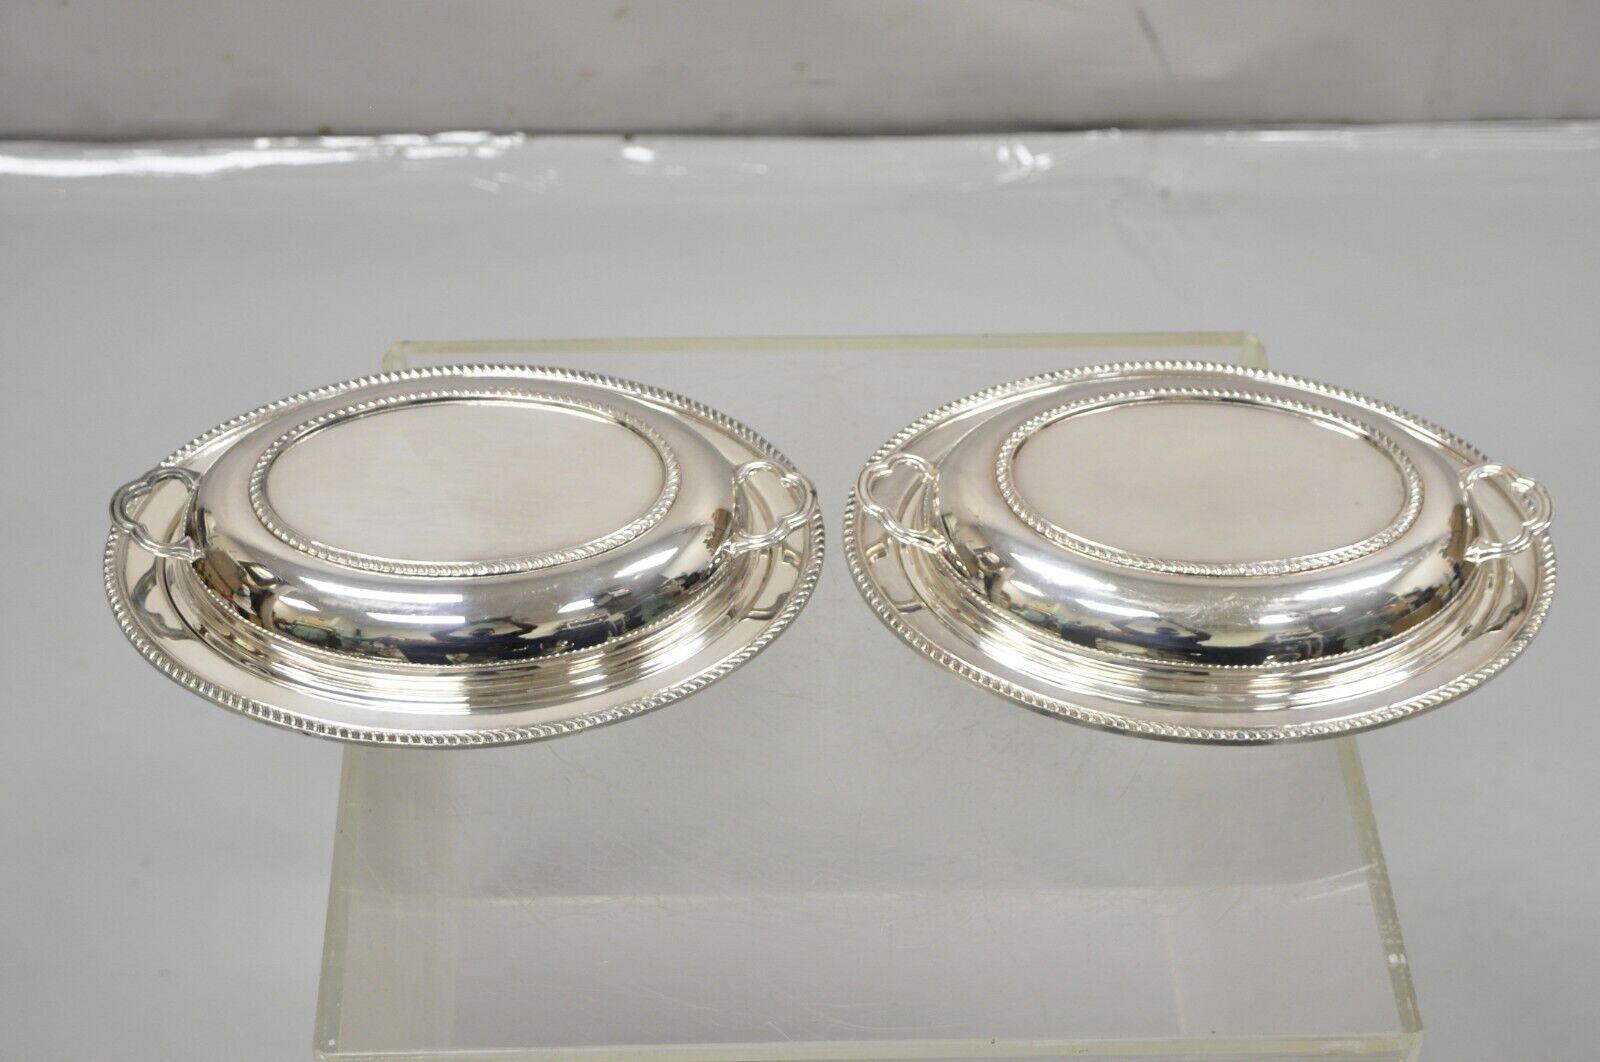 Vintage Poole Silver Co Silver Plated Lidded Serving Platter Dish - a Pair. Circa Mid 20th Century. Measurements:  3.25